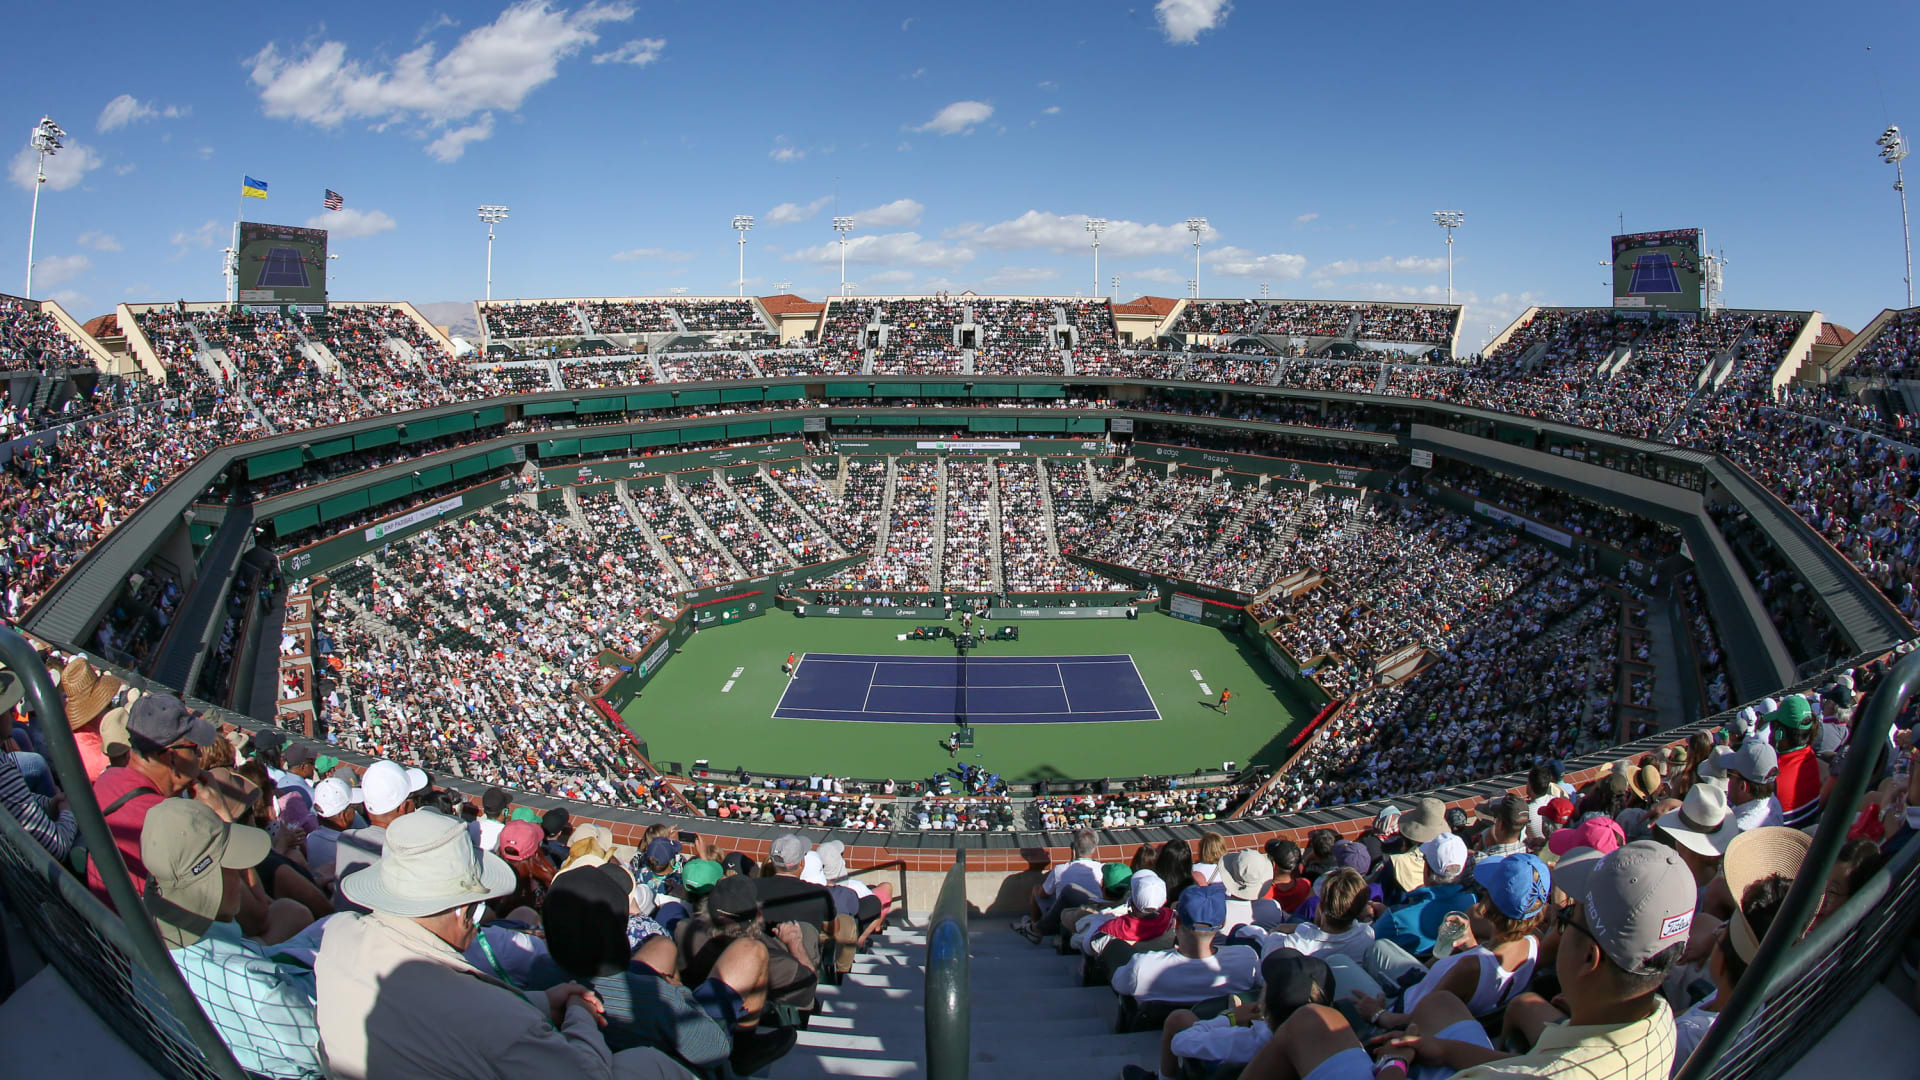 Tennis Channel Will Have Complete, Live Coverage of BNP Paribas Open, Miami Open March 8-April 2